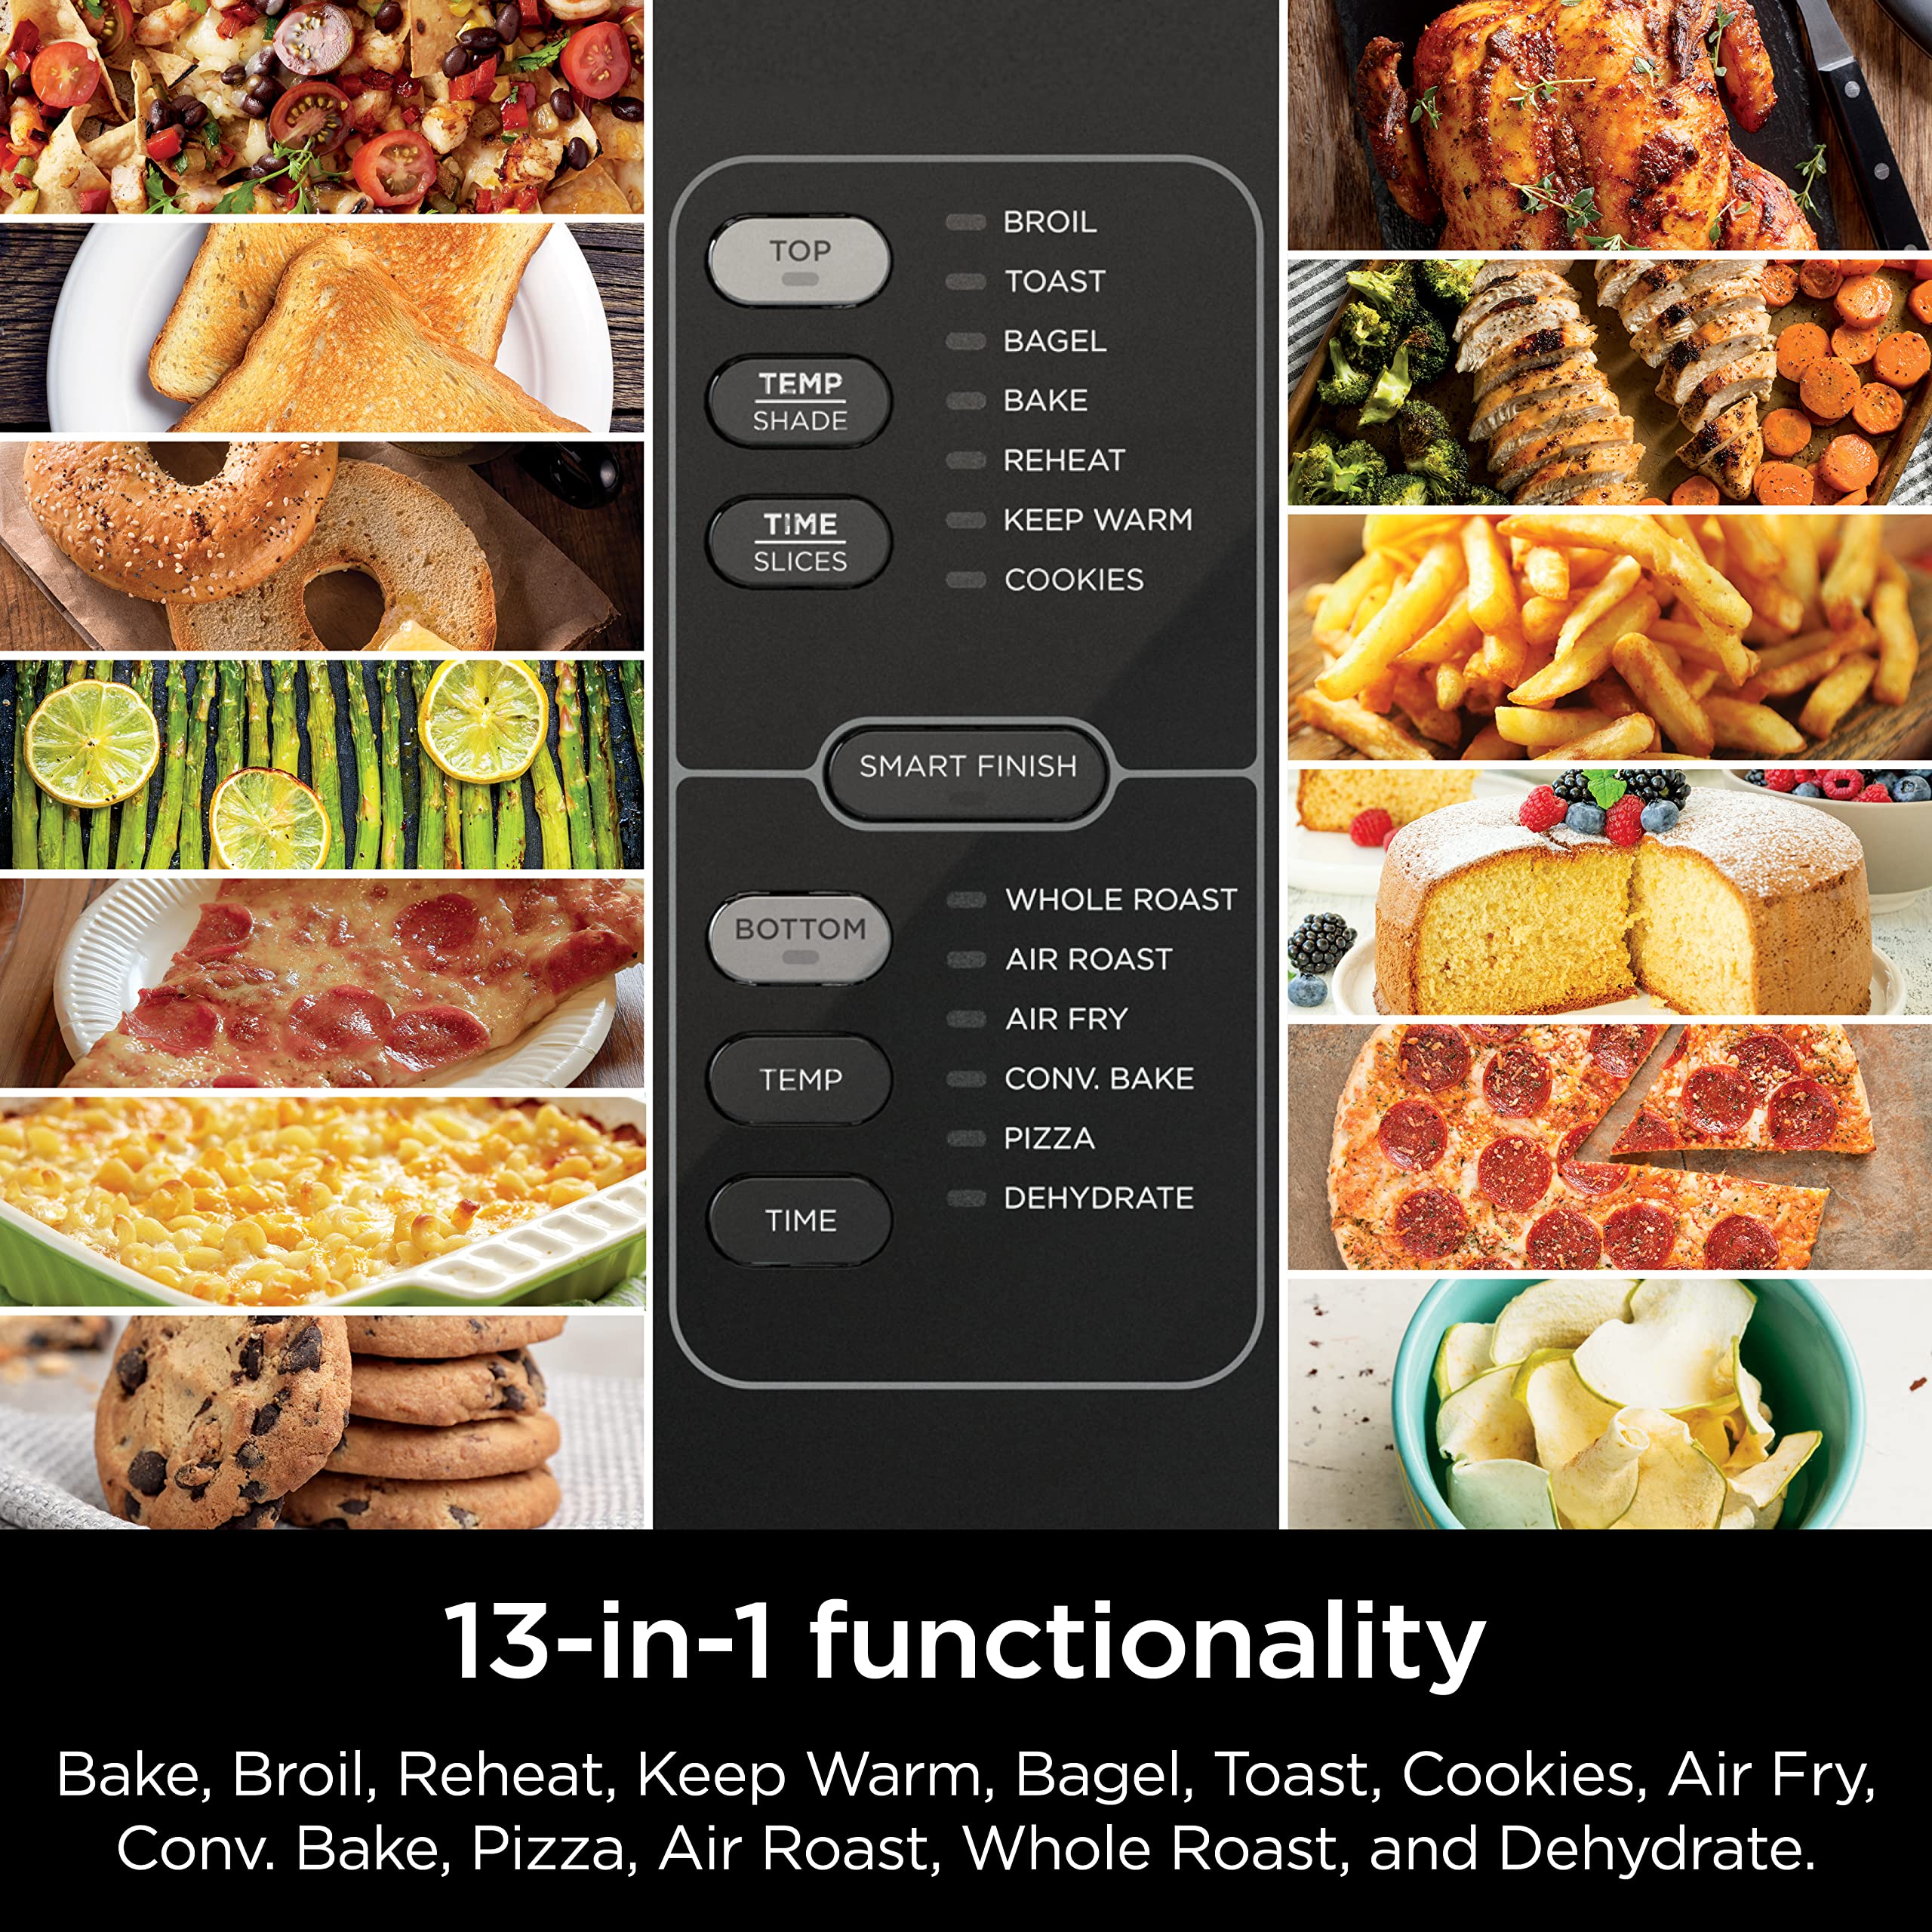 Ninja DCT402BK 13-in-1 Double Oven with FlexDoor, FlavorSeal & Smart Finish, Rapid Top Oven, Convection and Air Fry Bottom Bake, Roast, Toast, Fry, Pizza More, Black